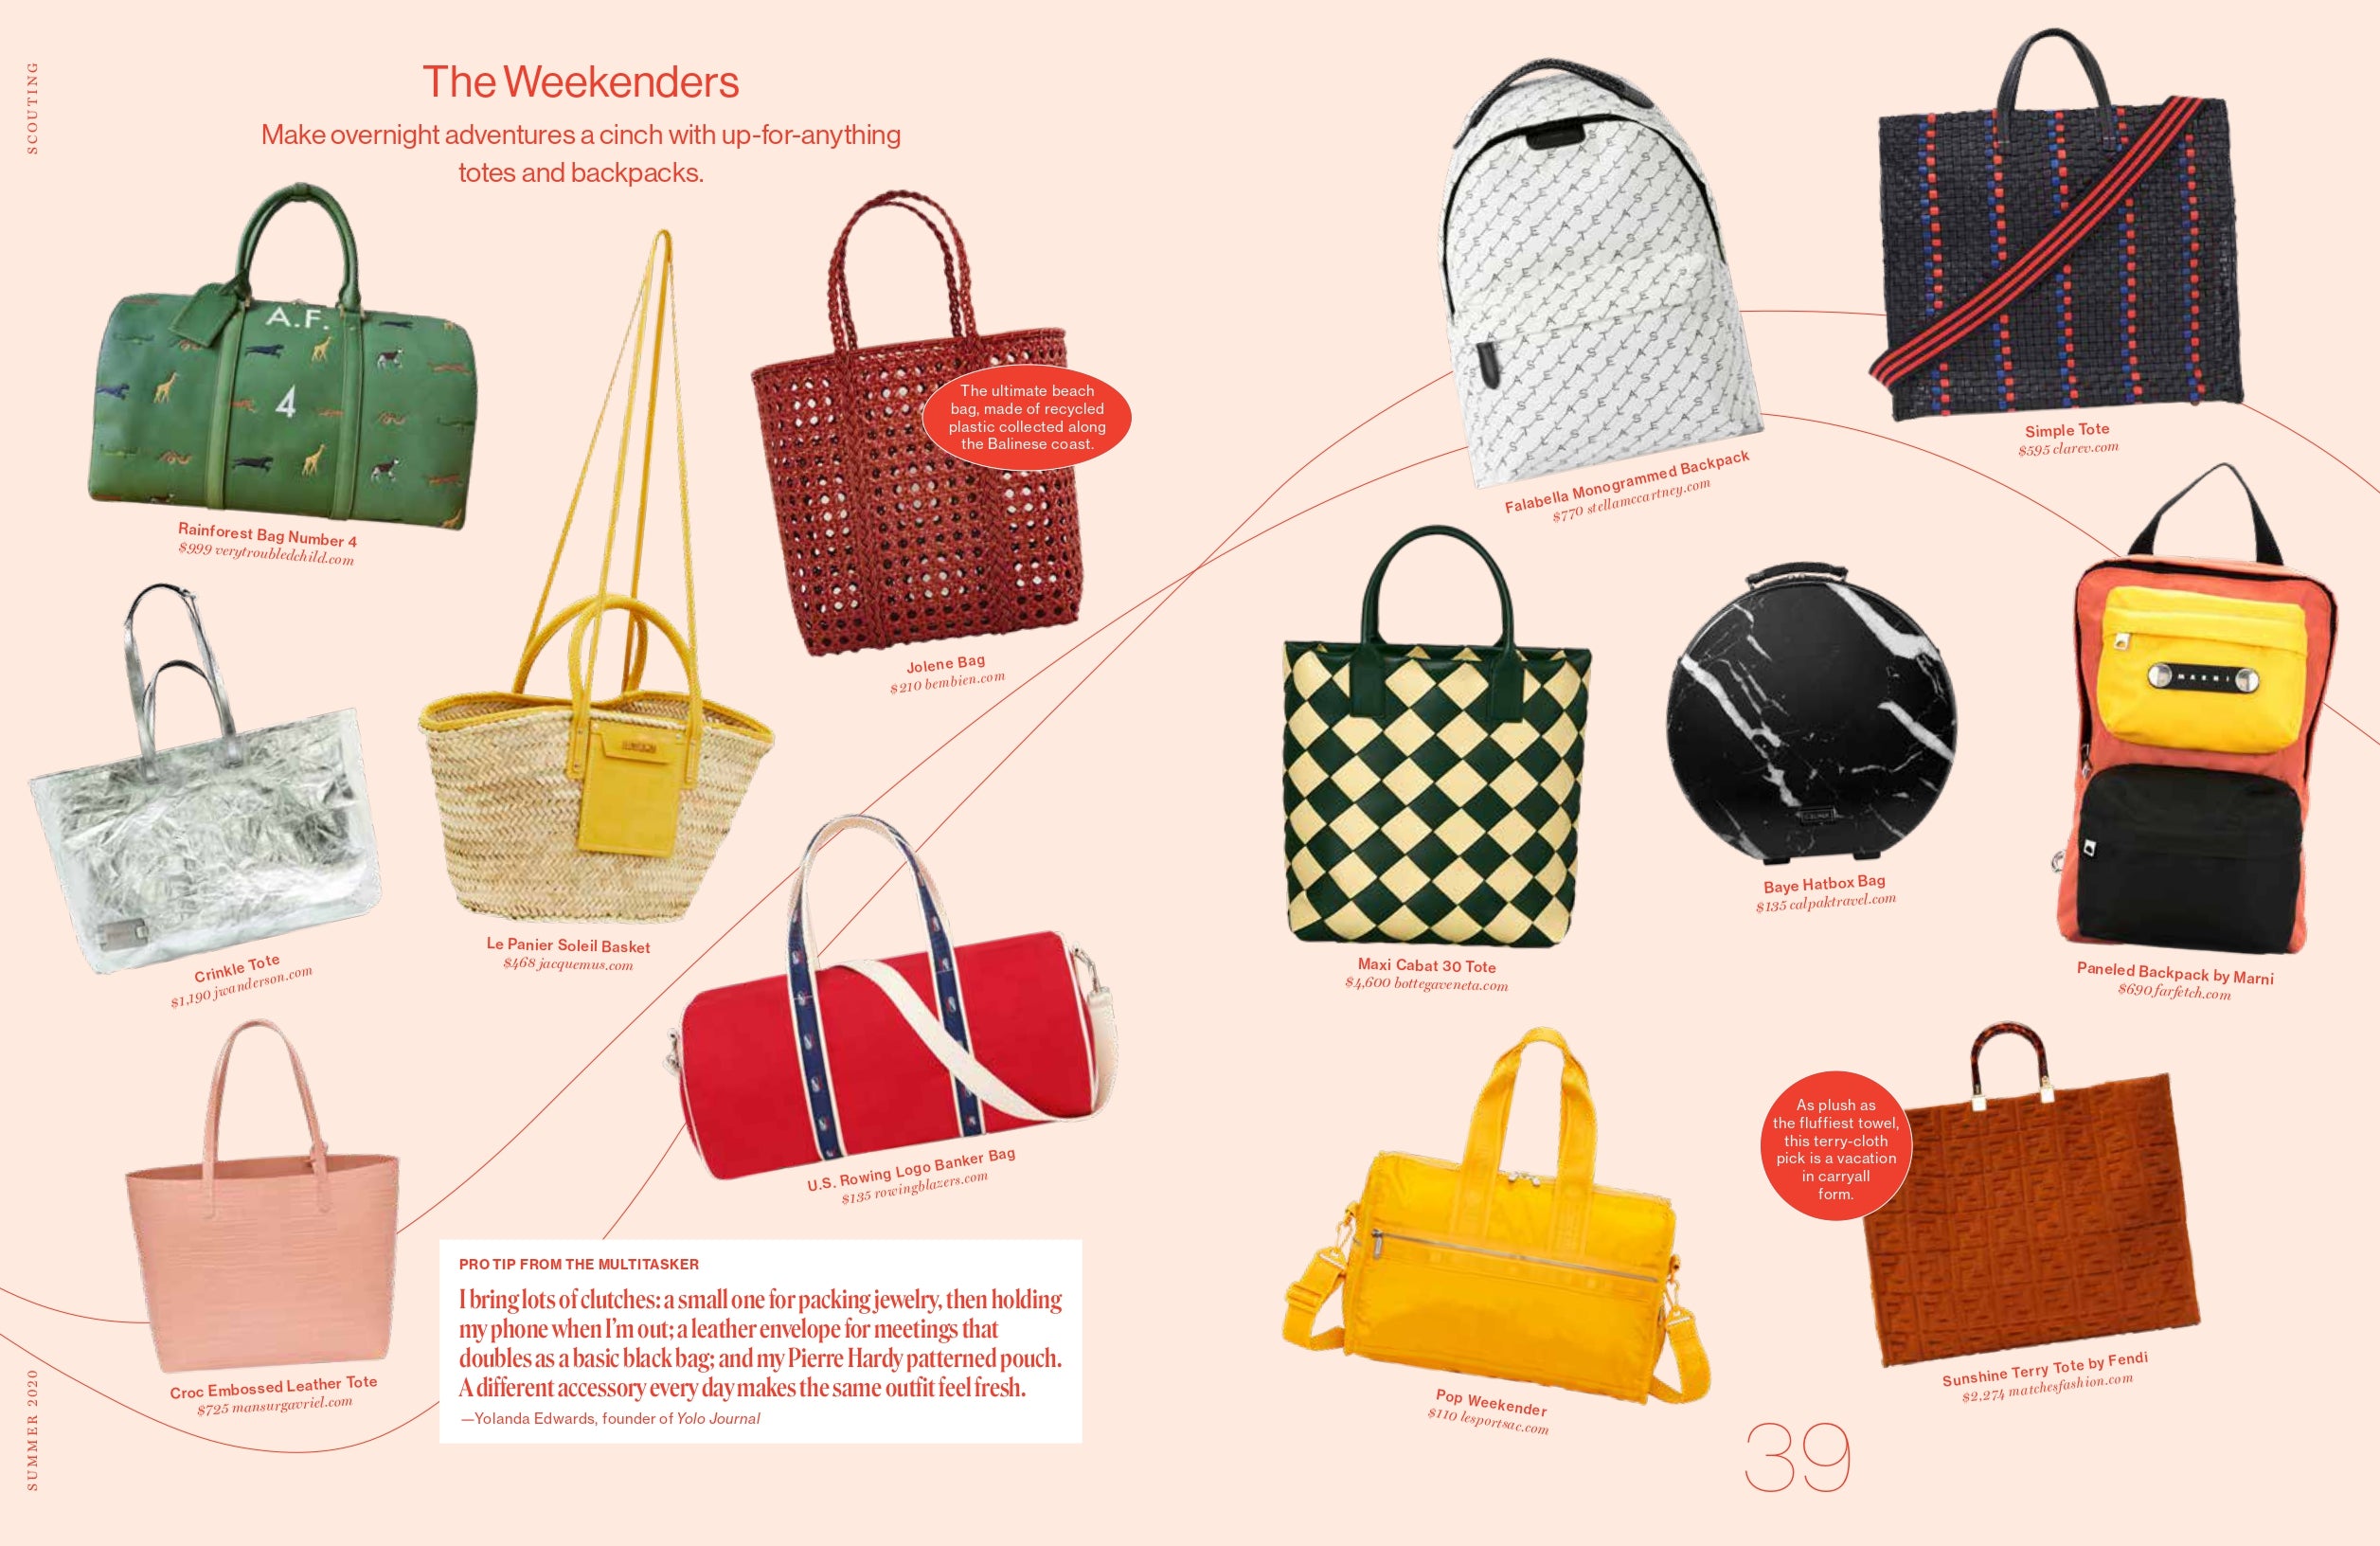 Snippet From Domino Magazine Summer 2020 Issue Featuring Our Simple Tote in Black Woven with Stripes